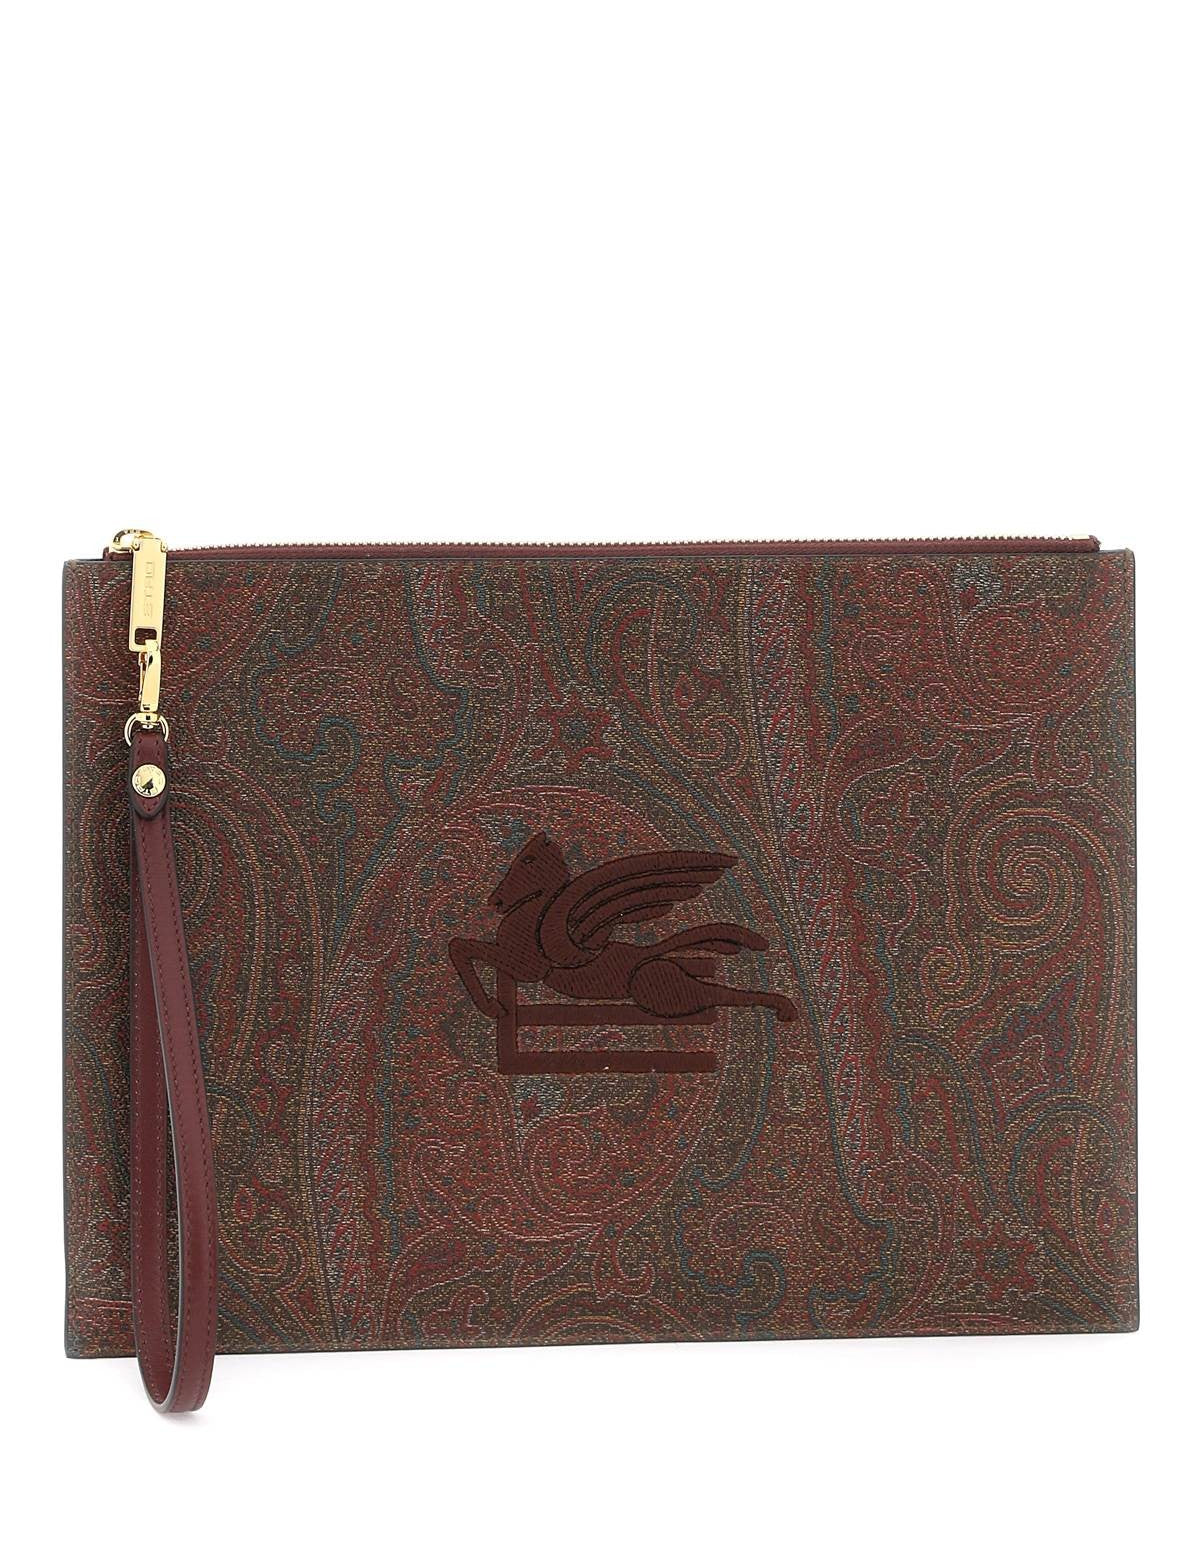 etro-paisley-pouch-with-embroidery_05e2f349-48cc-445a-ab98-b3c2df80c5e4.jpg